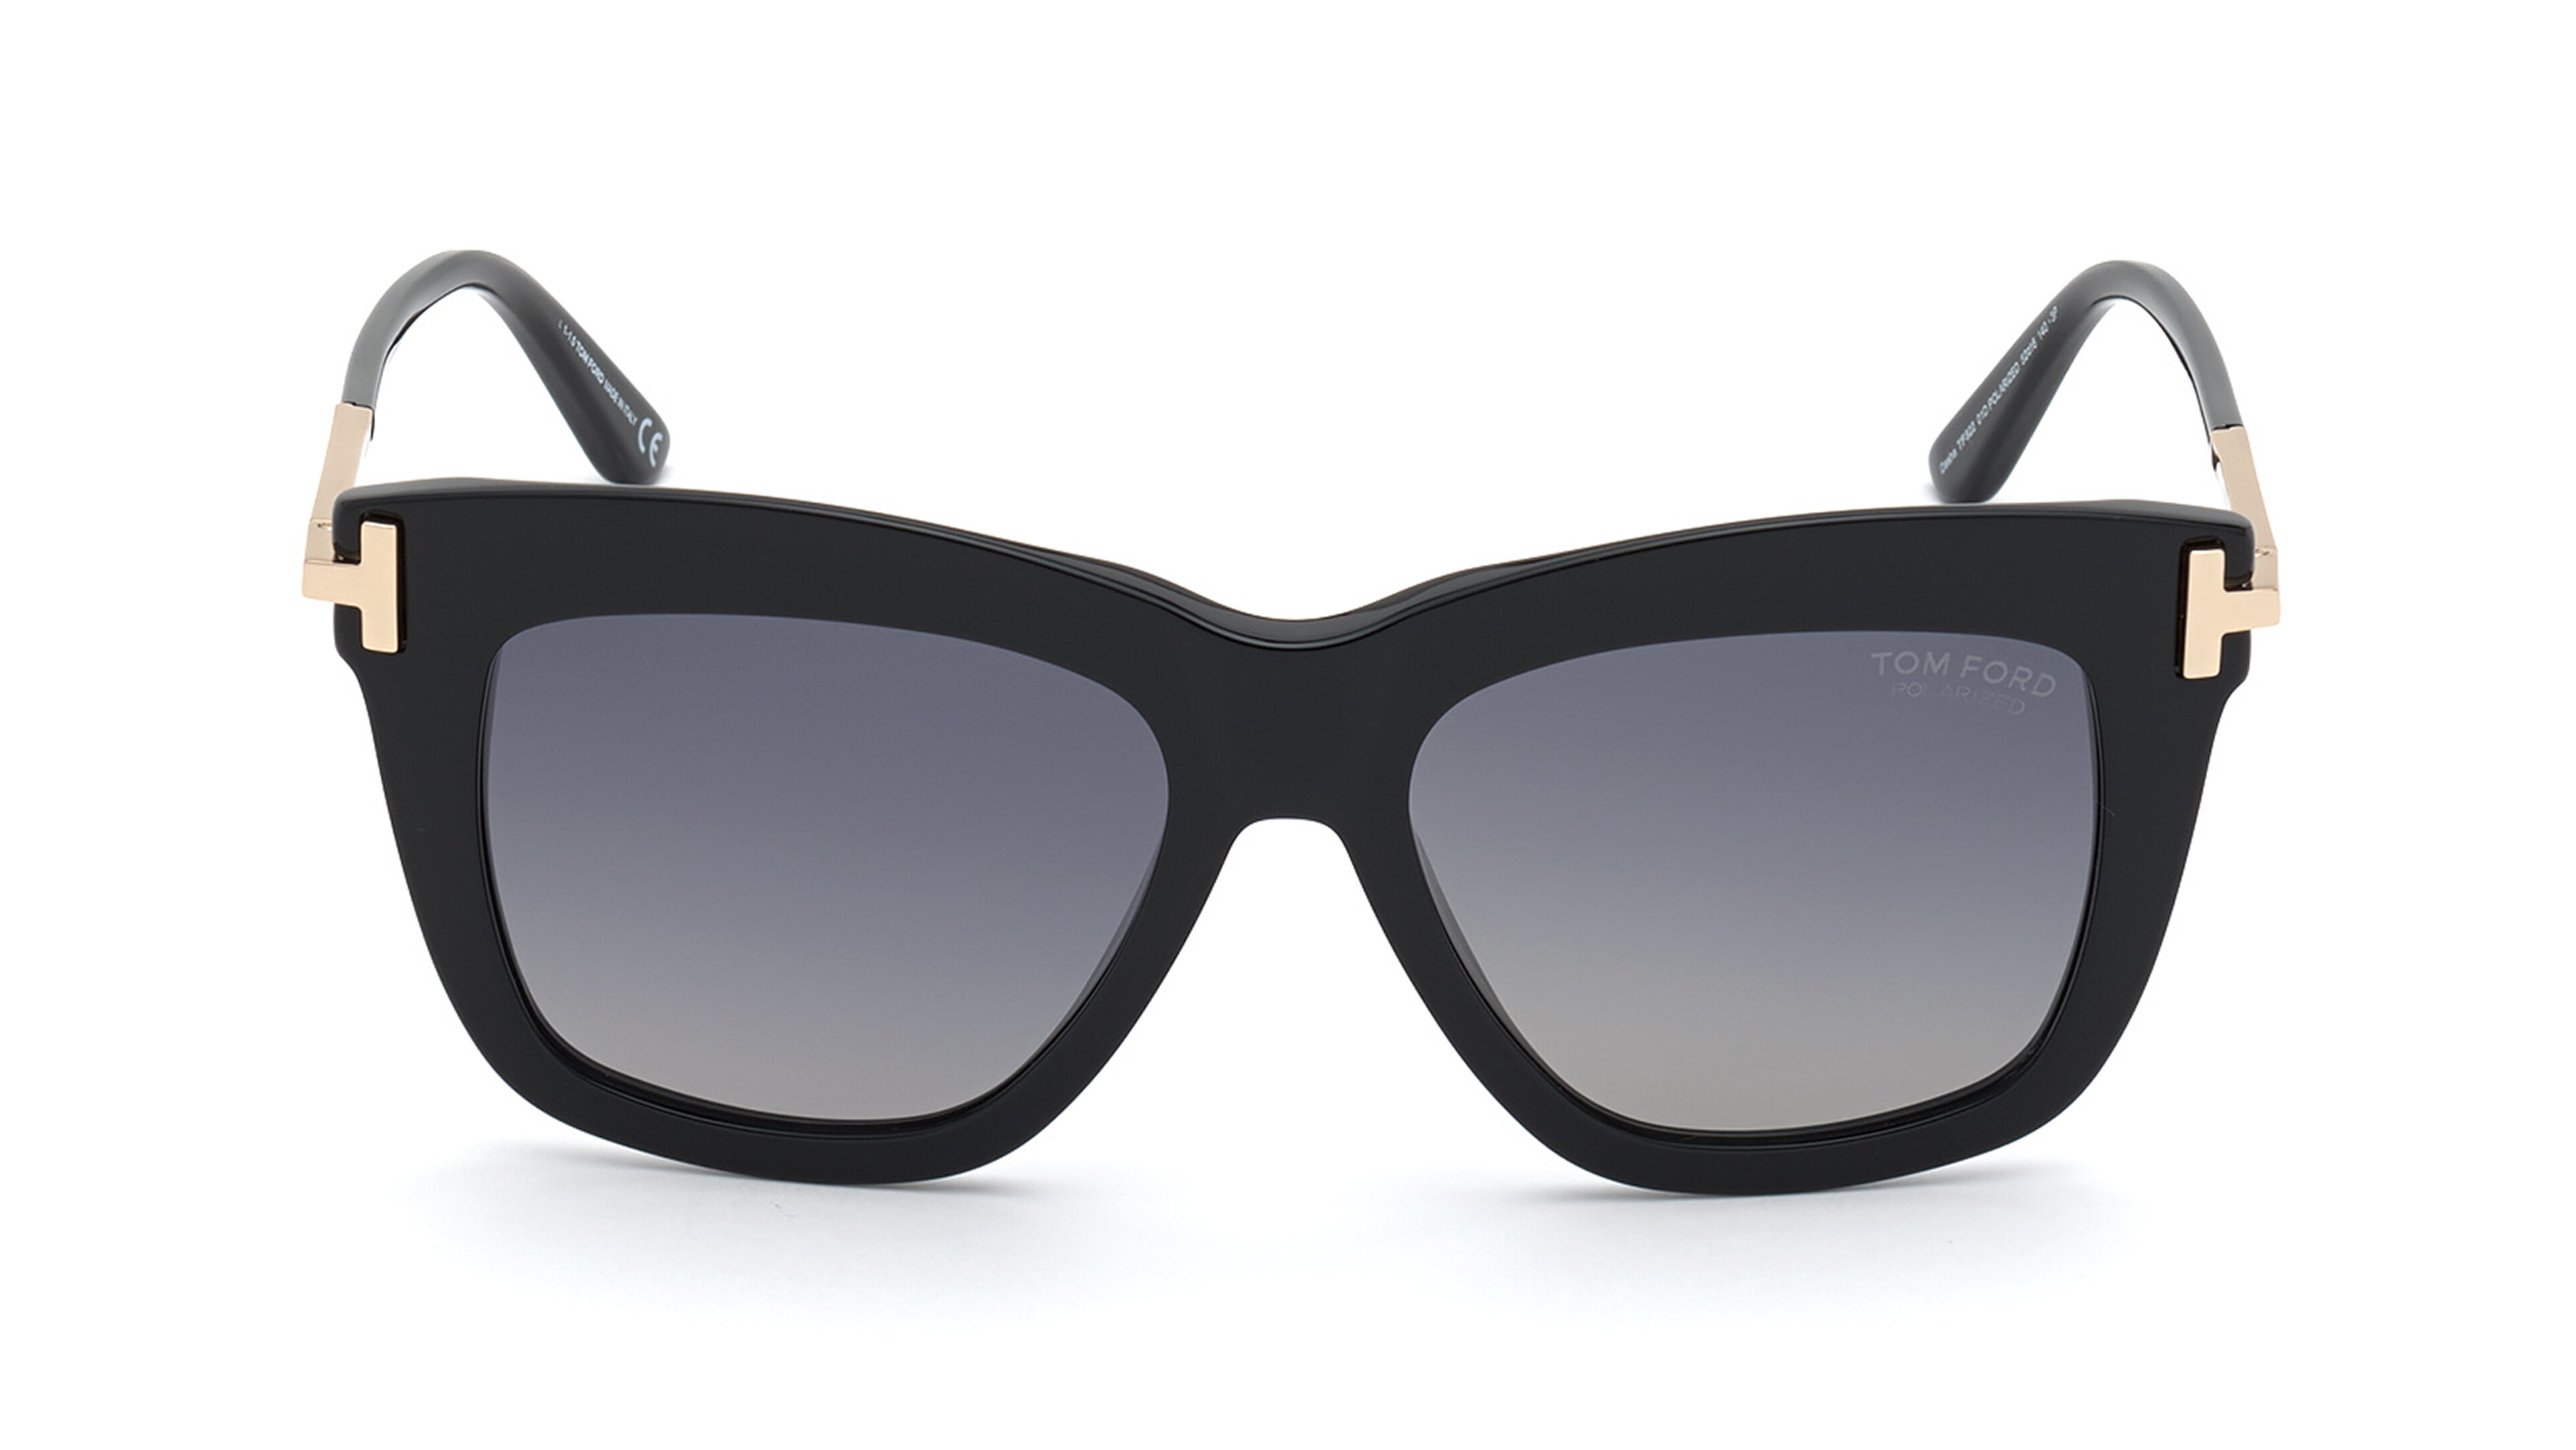 [products.image.front] Tom Ford FT0822 01D Sonnenbrille